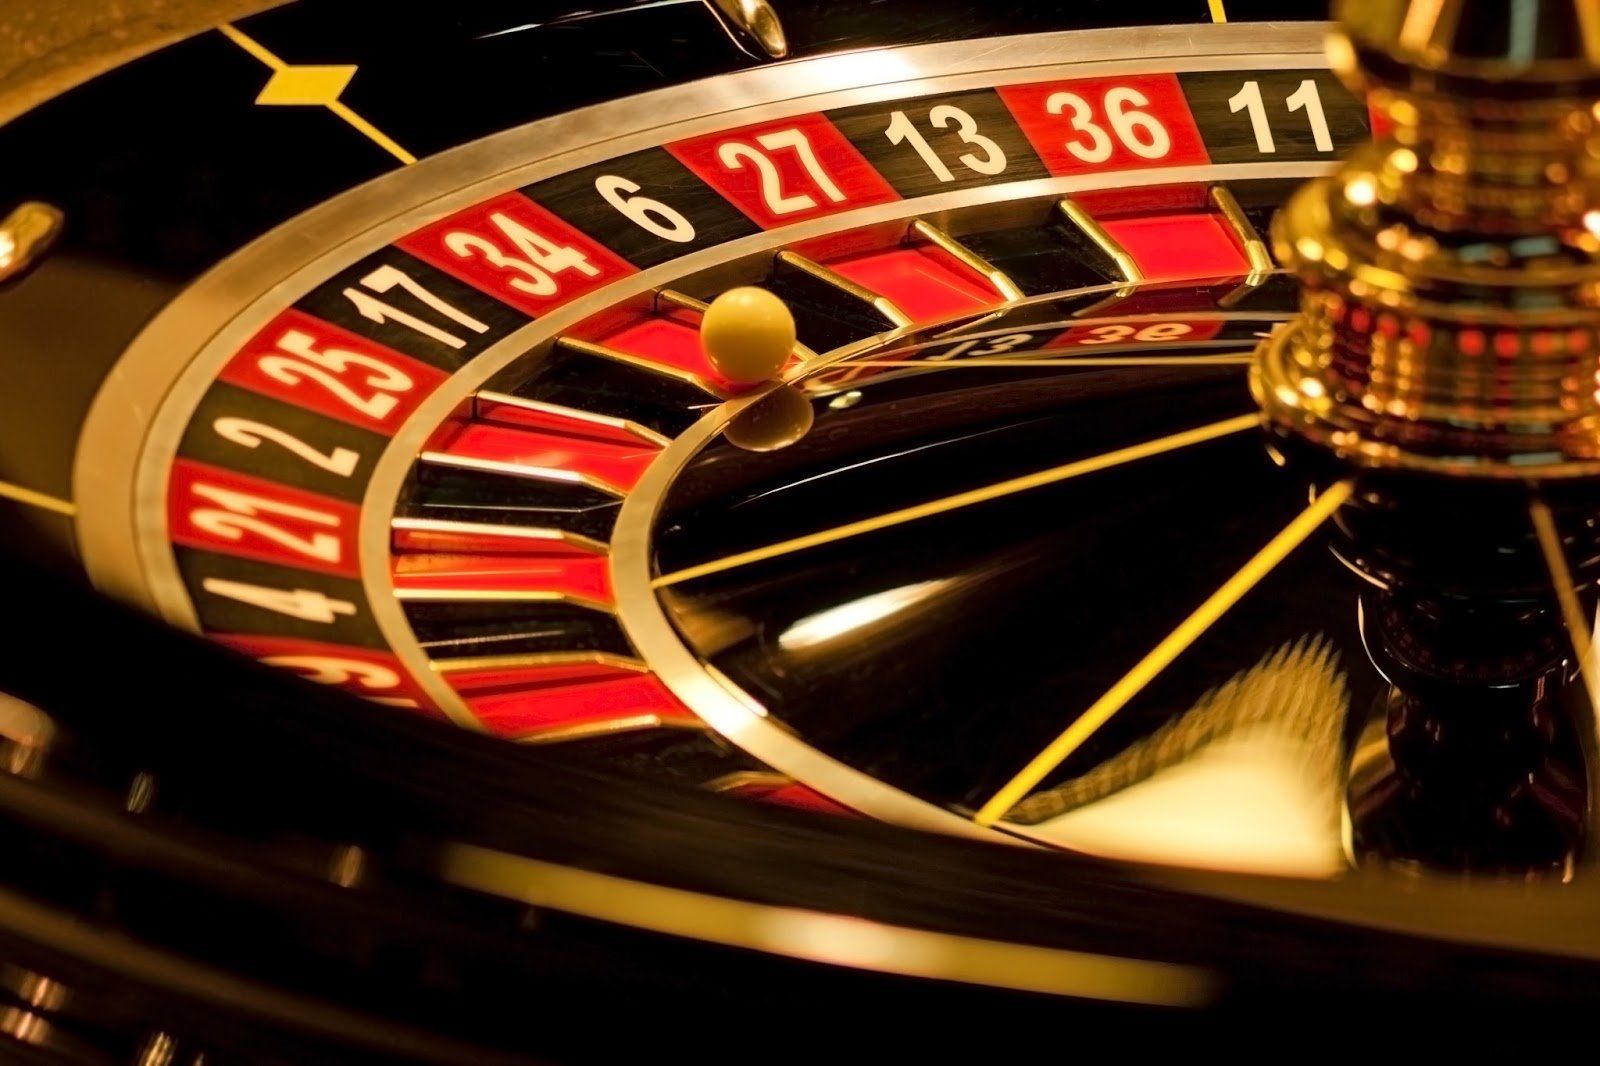 Tips On The Best Features Of Casino Sites Disclosed Here